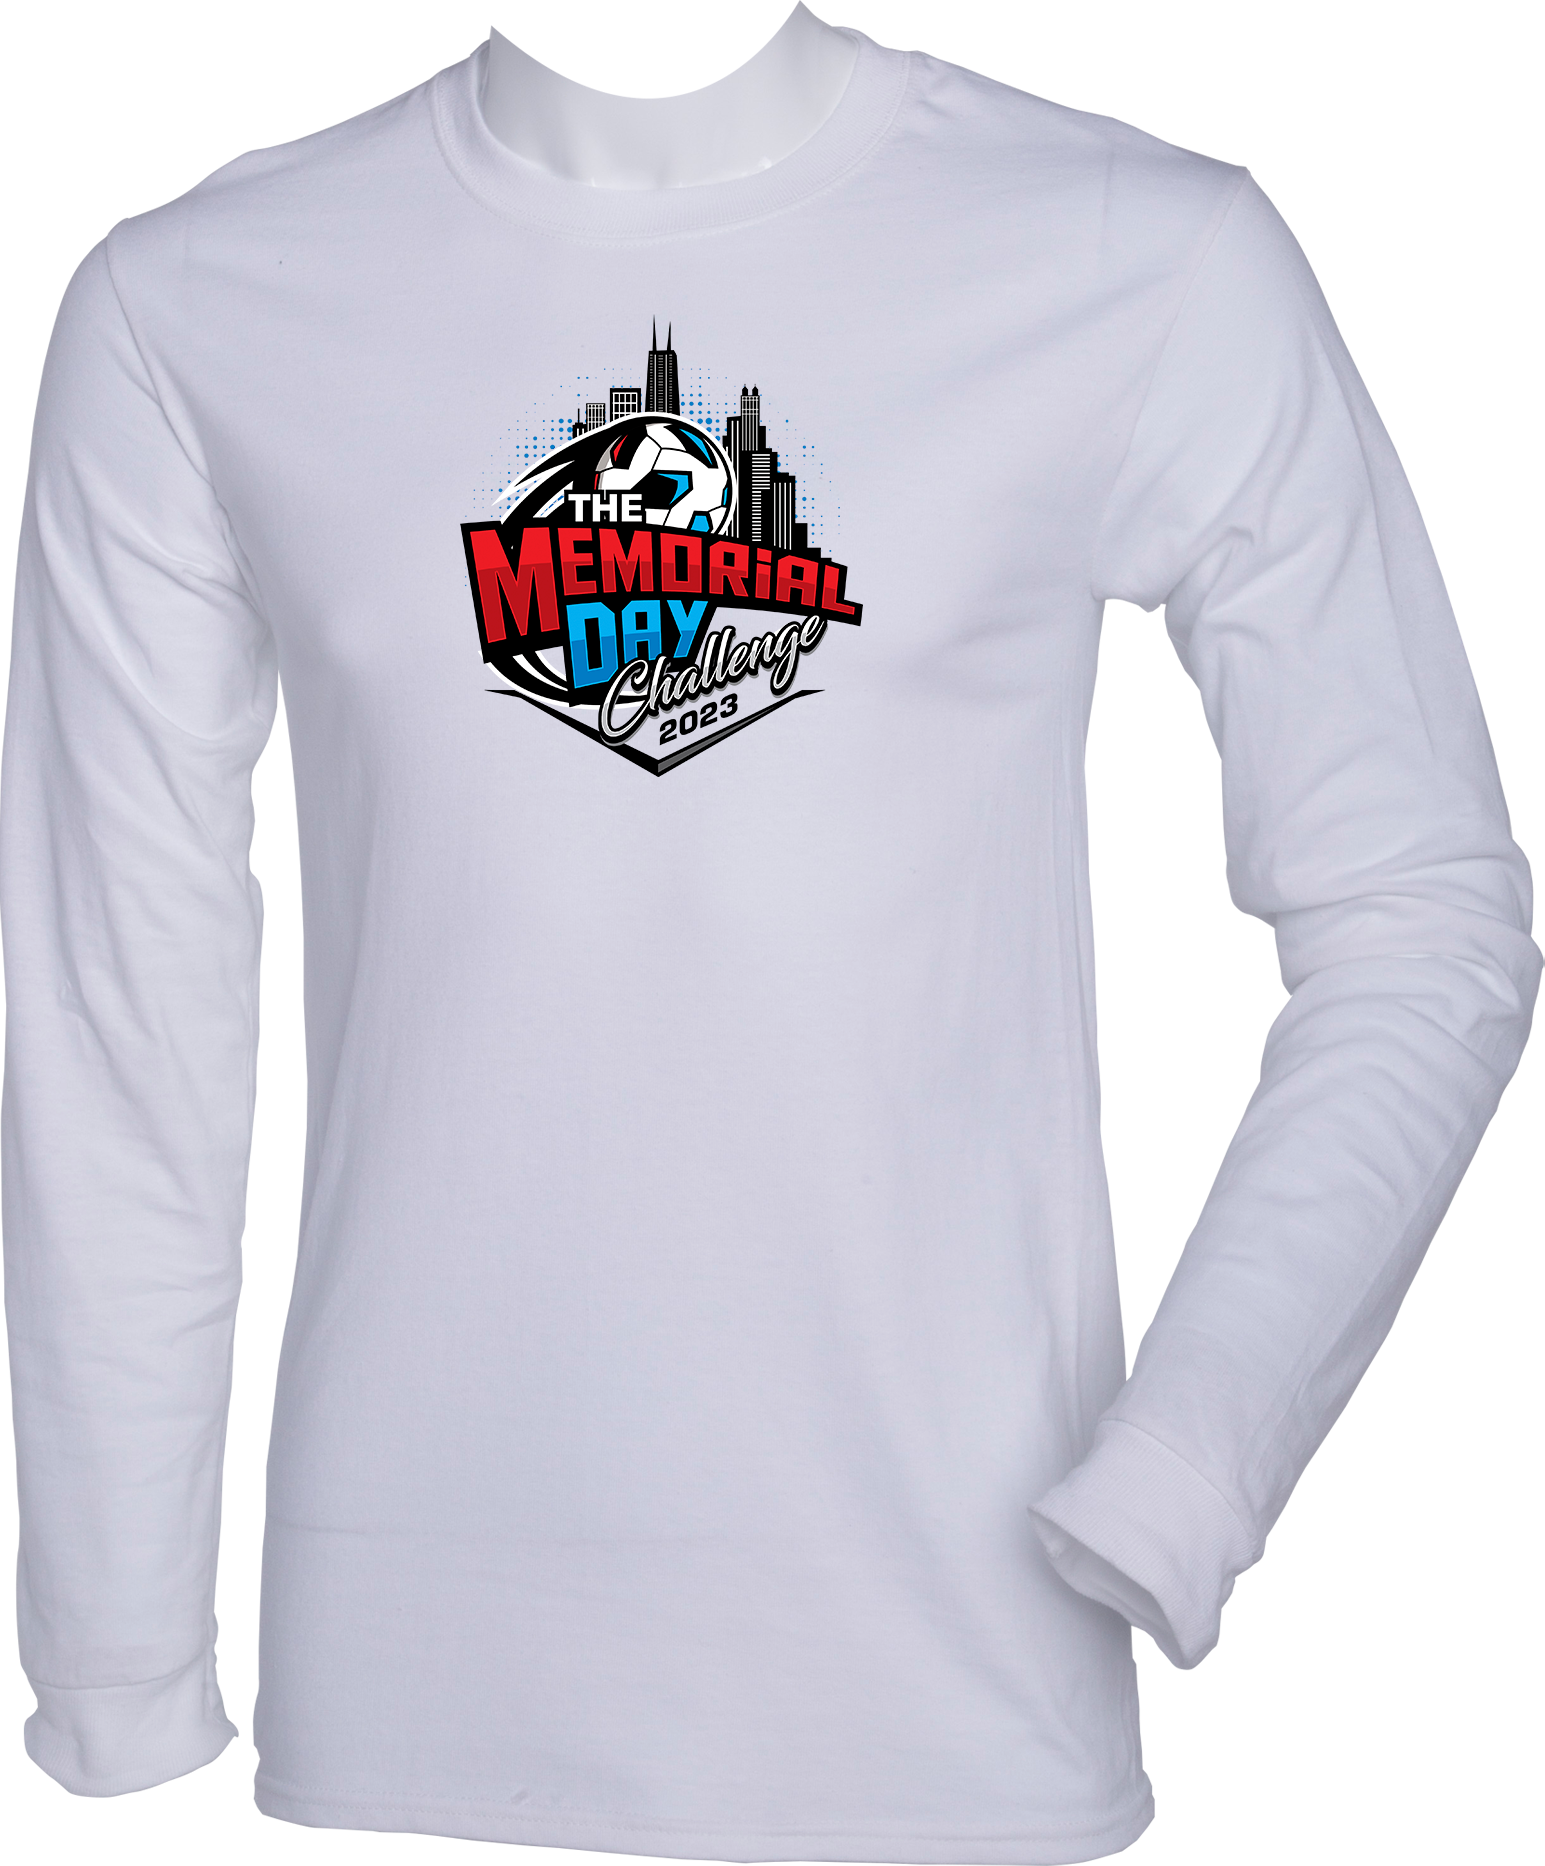 LONG SLEEVES - 2023 The Memorial Day Challenge